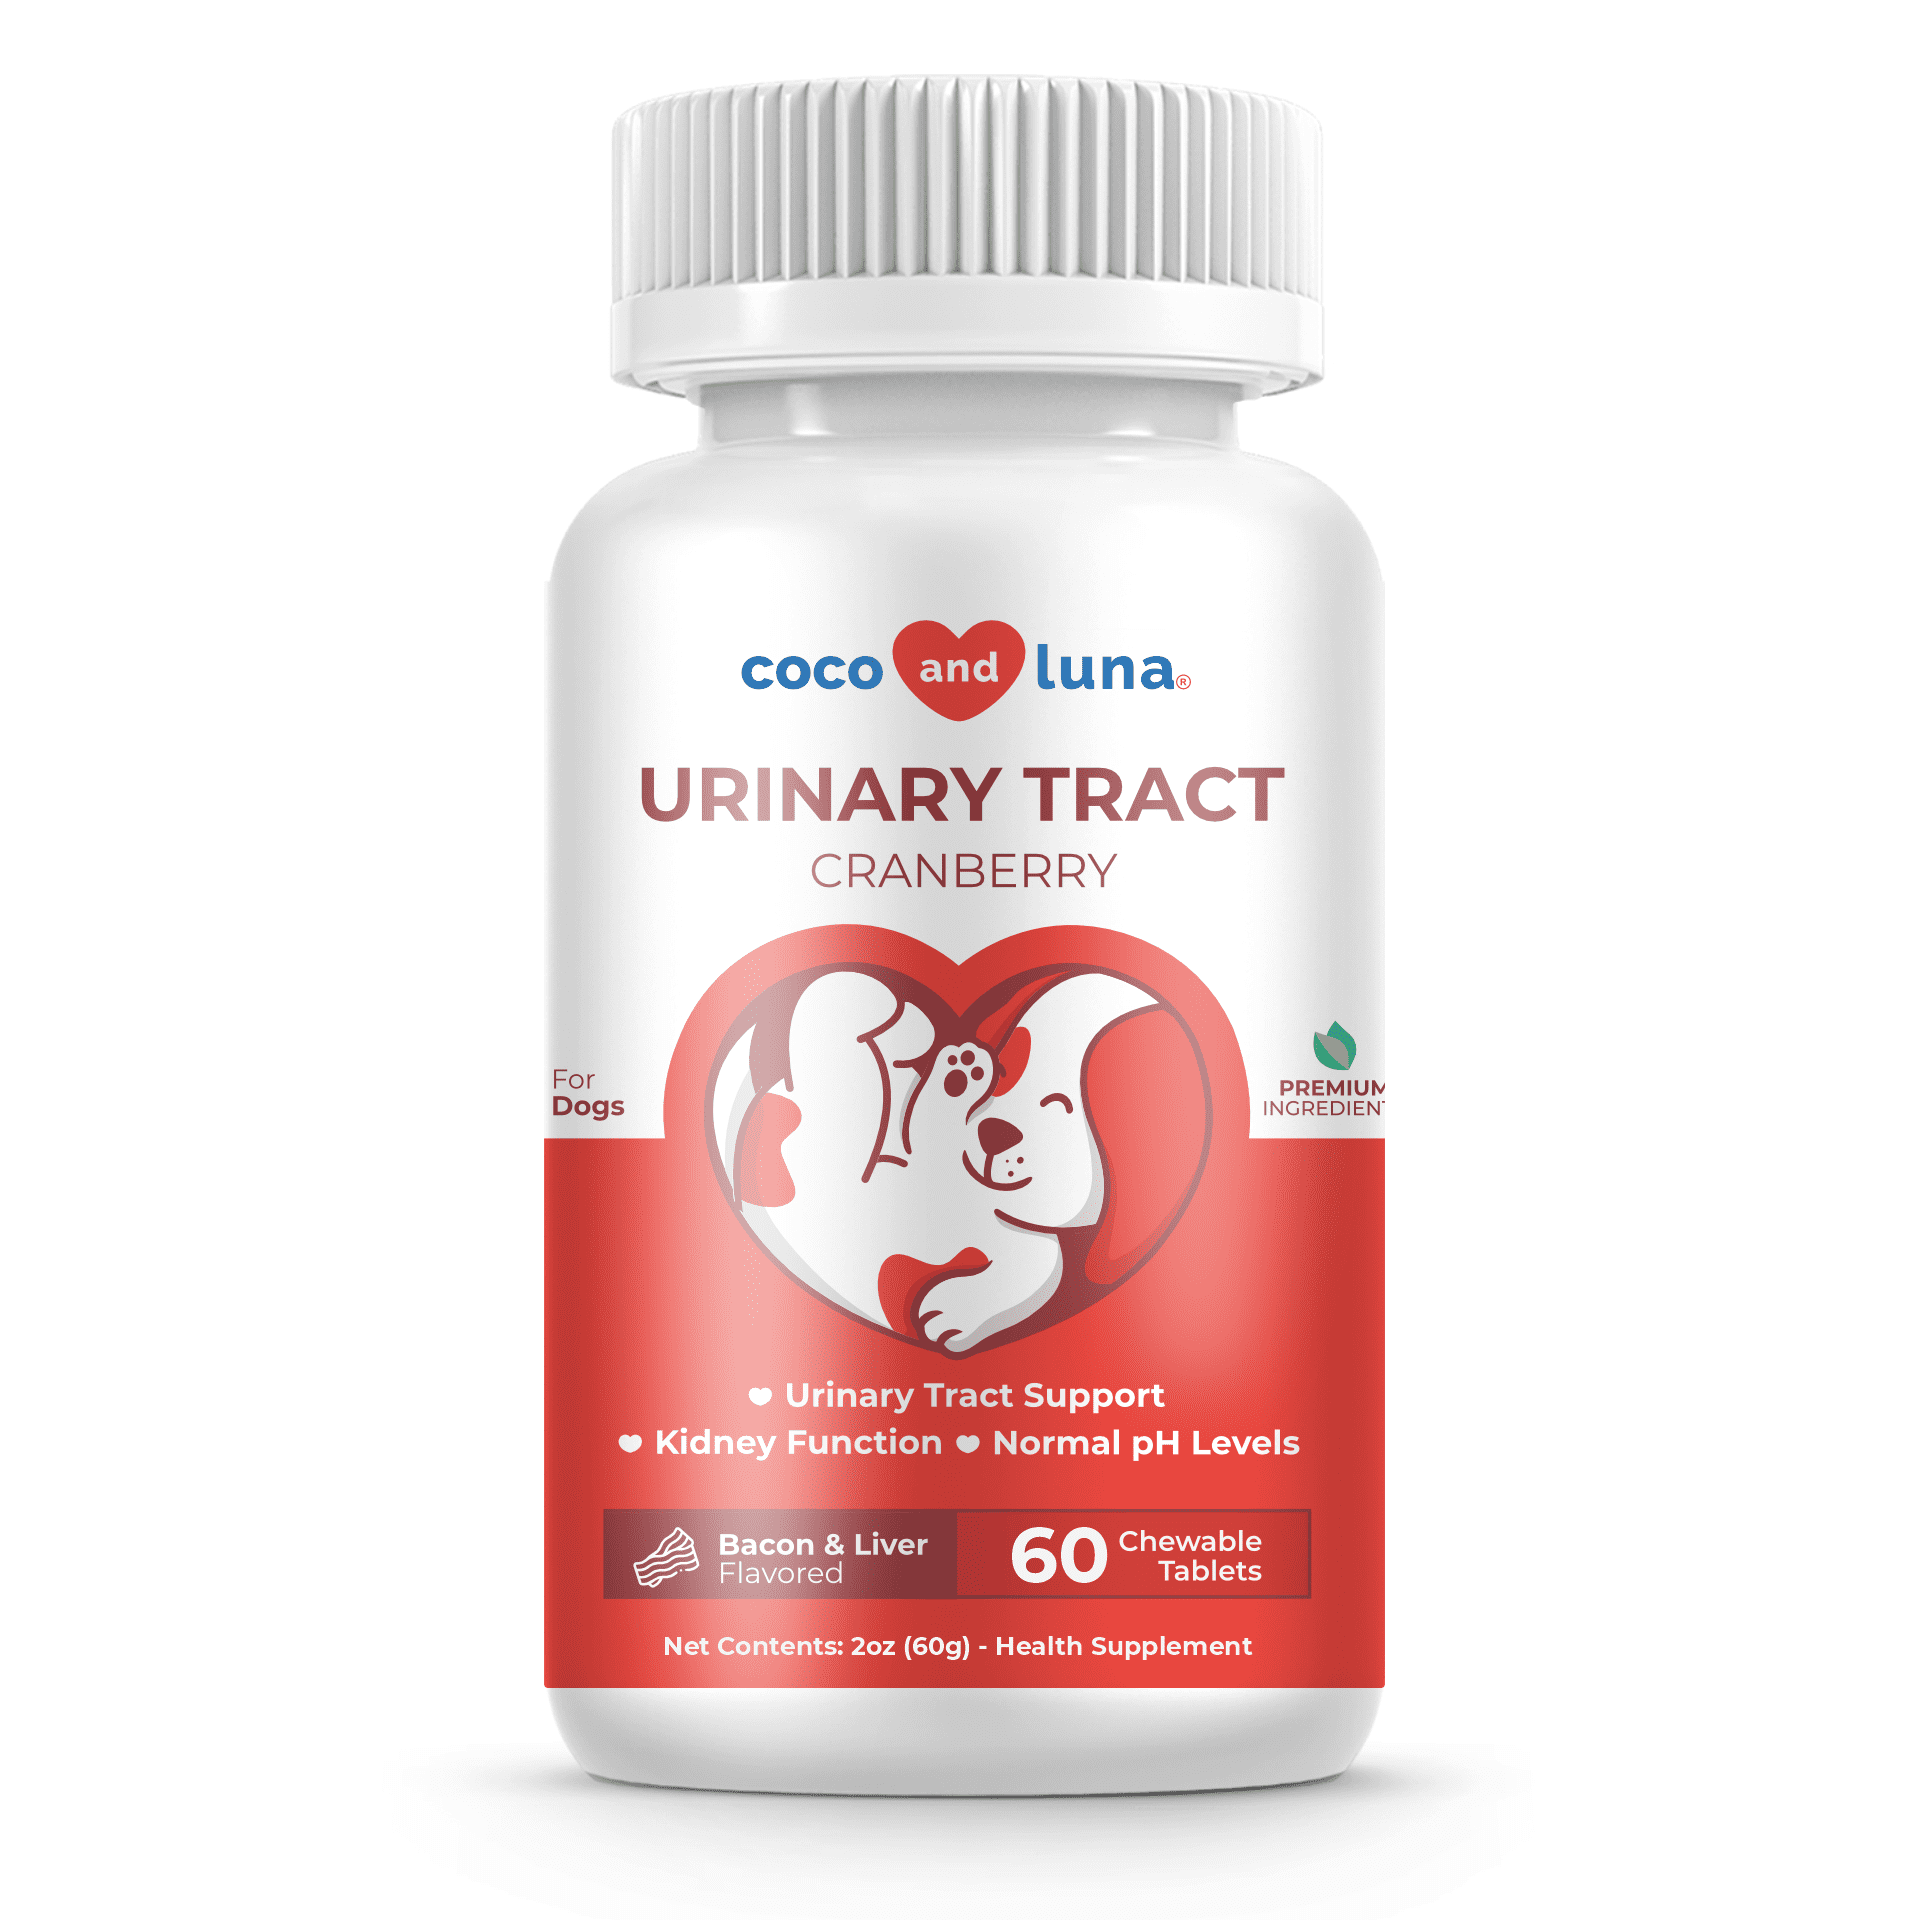 Urinary Tract Support for Dogs  - 60 Chewable Tablets - Coco and Luna